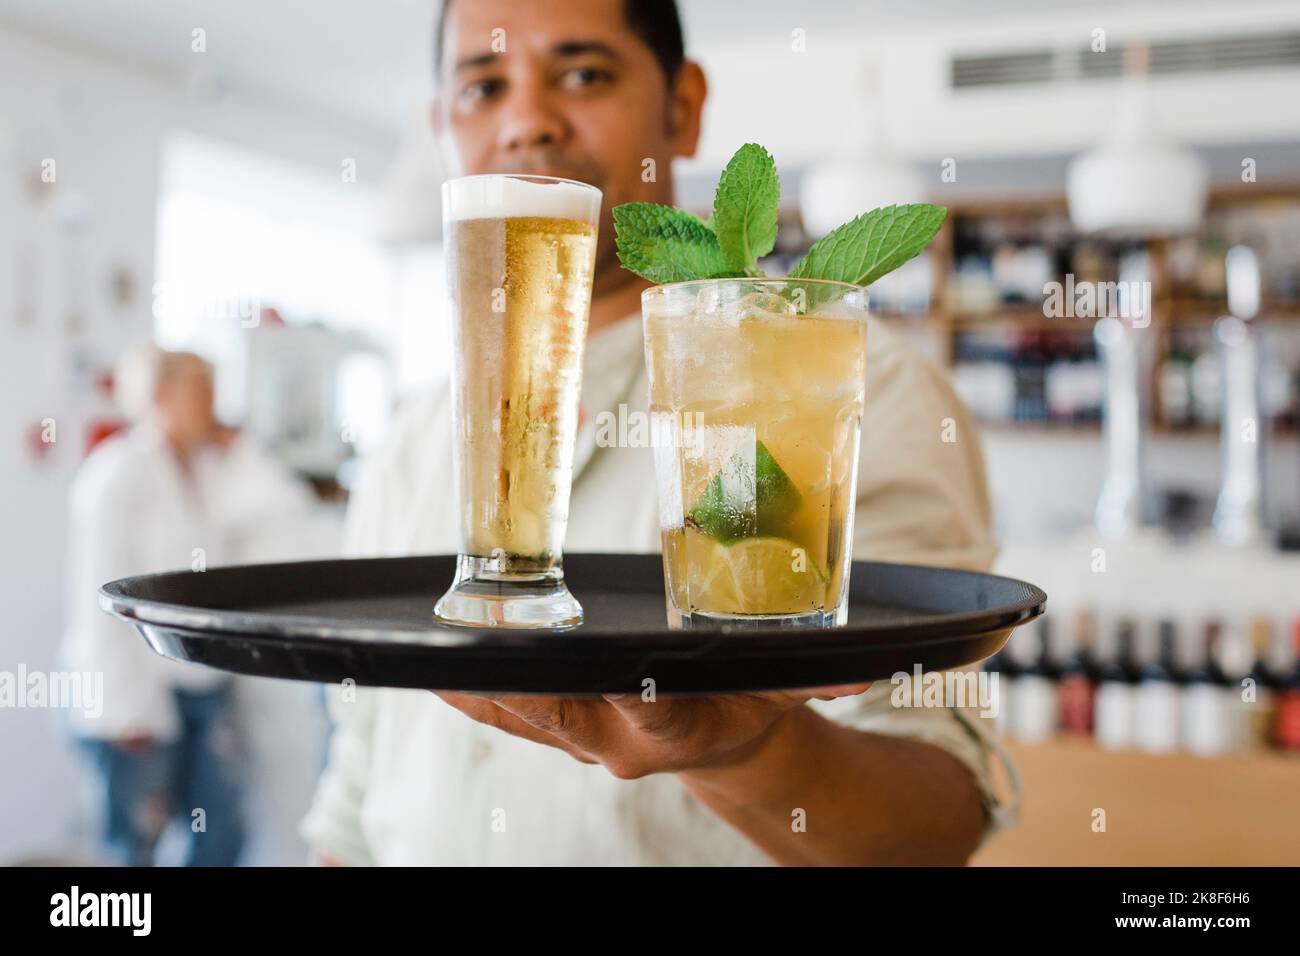 Waiter with tray serving drinks at restaurant Stock Photo